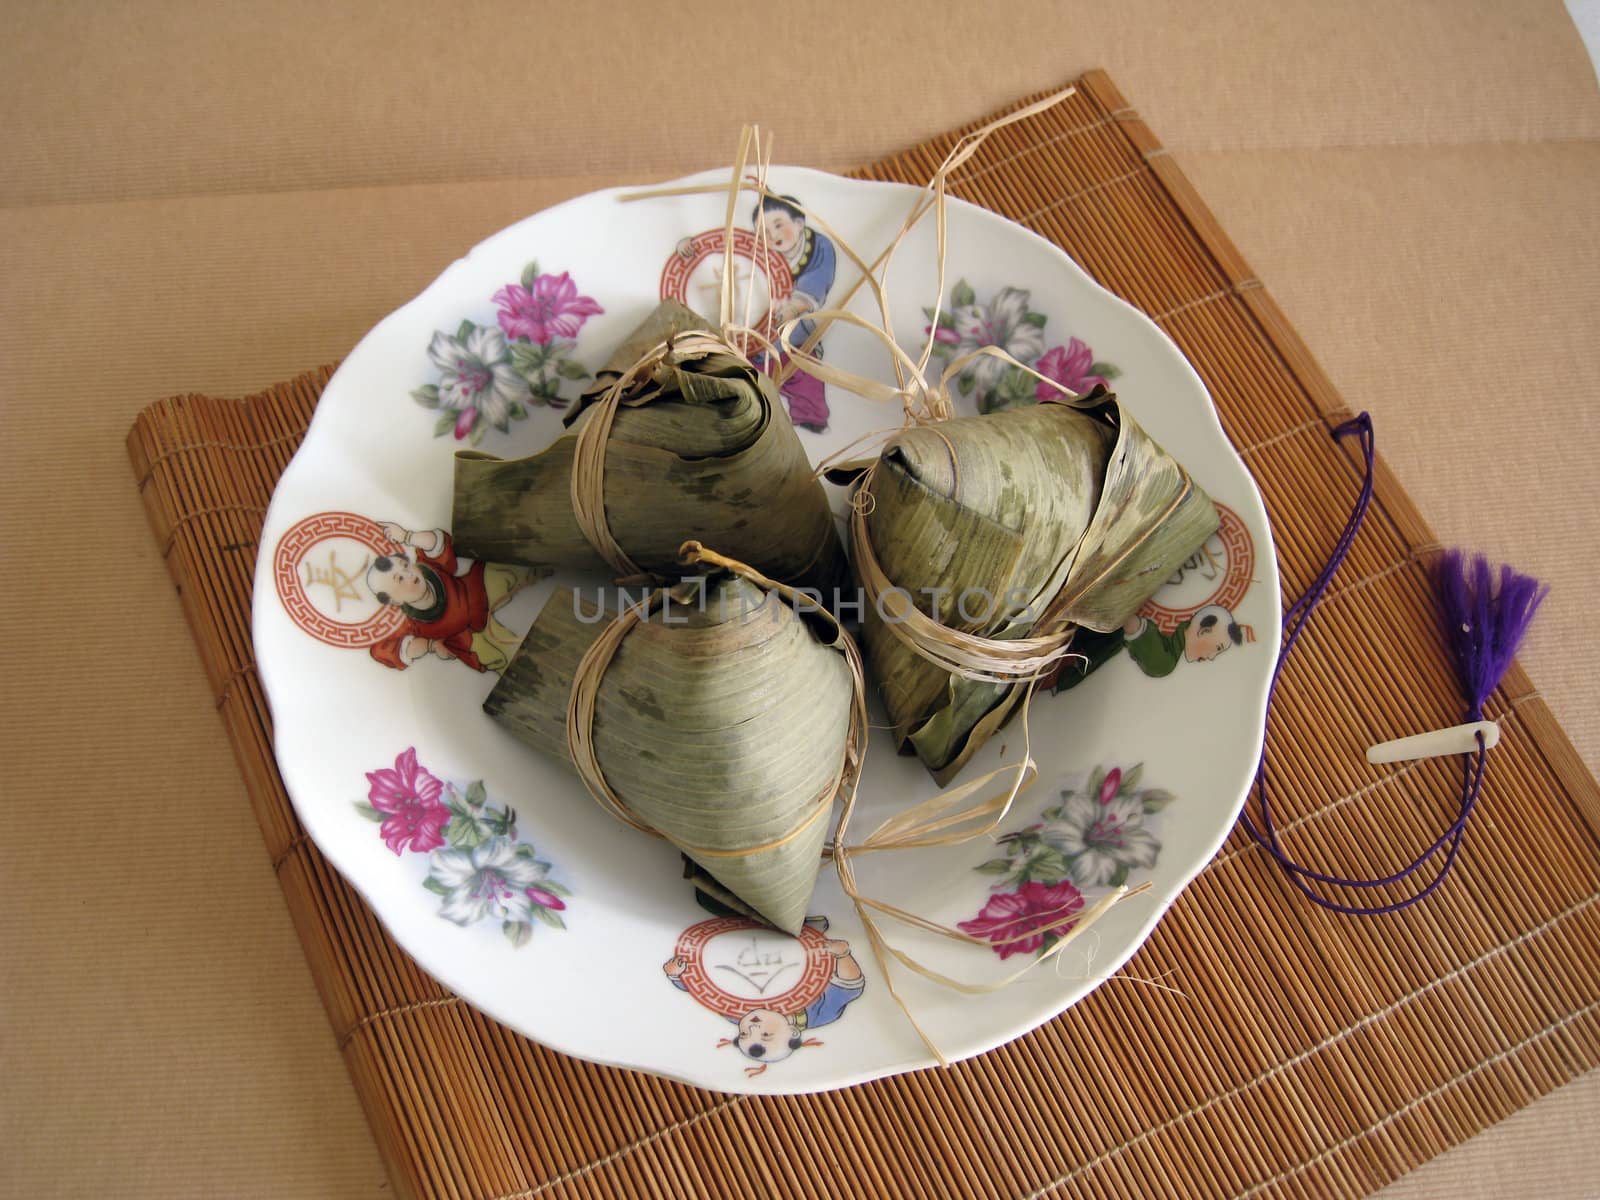 a pyramid-shaped mass of glutinous rice wrapped in leaves, one culture occasion in Chinese